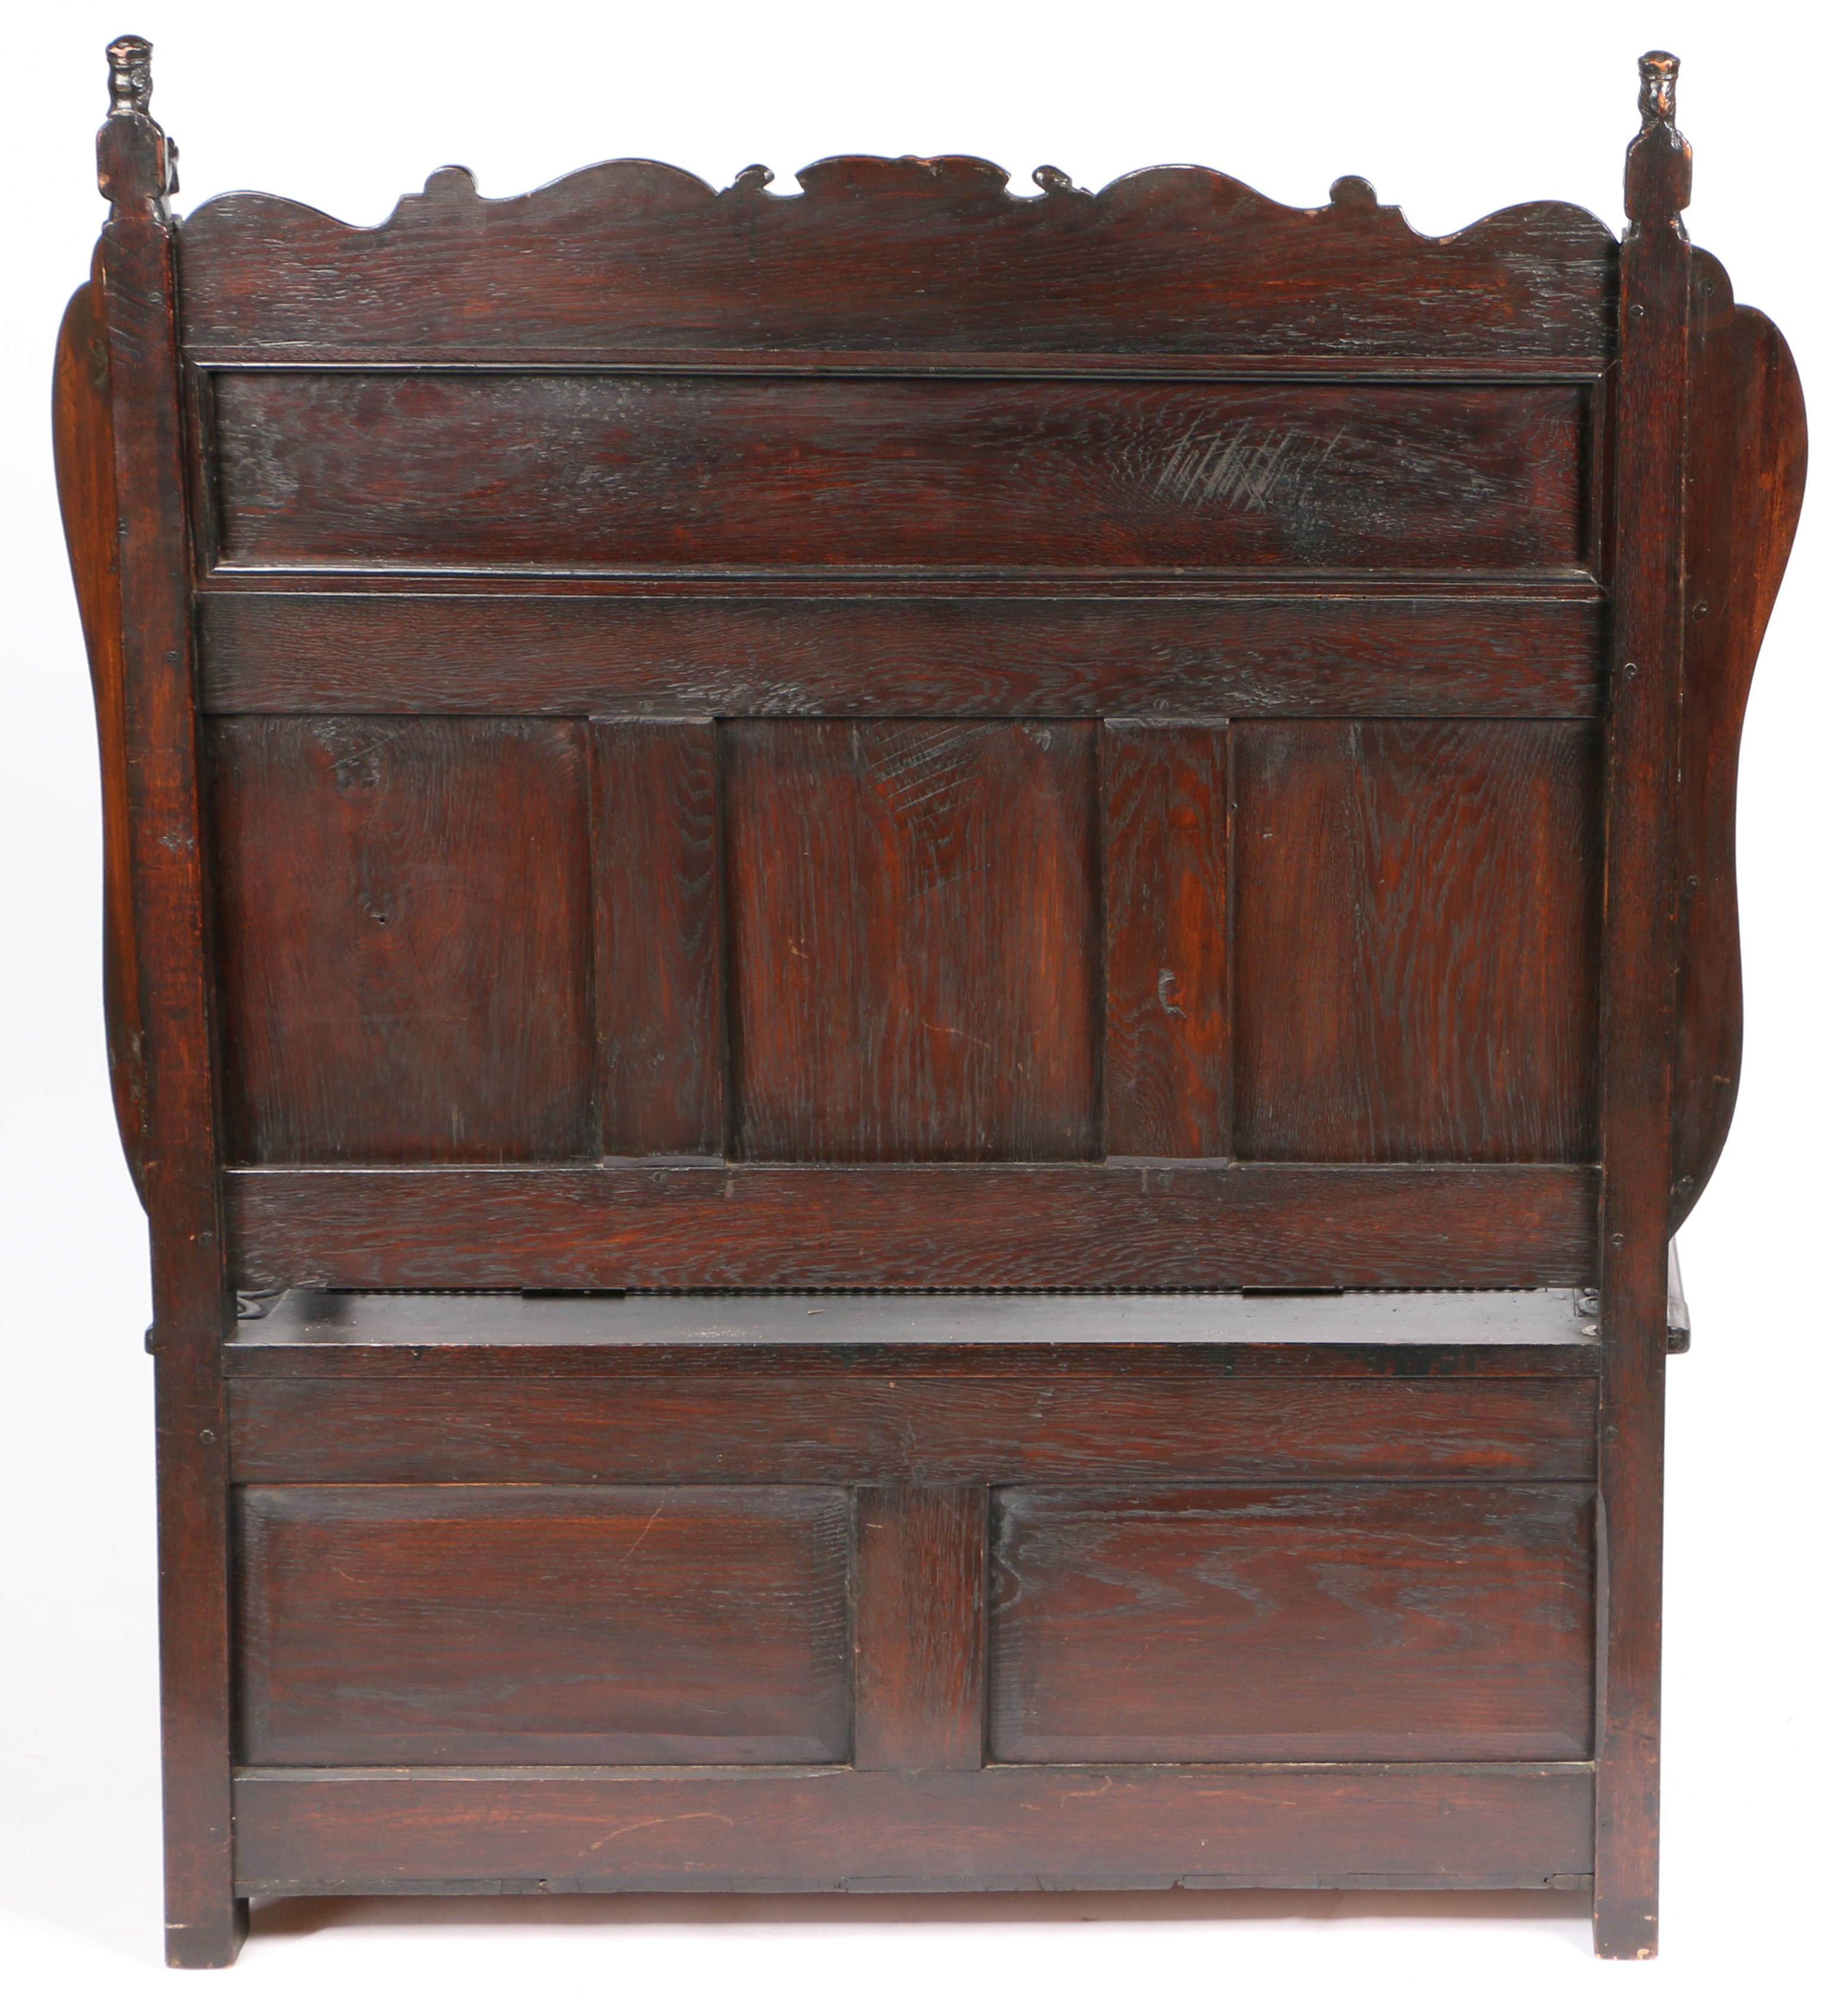 A 19TH CENTURY OAK SETTLE IN THE 17TH CENTURY MANNER. - Image 4 of 4